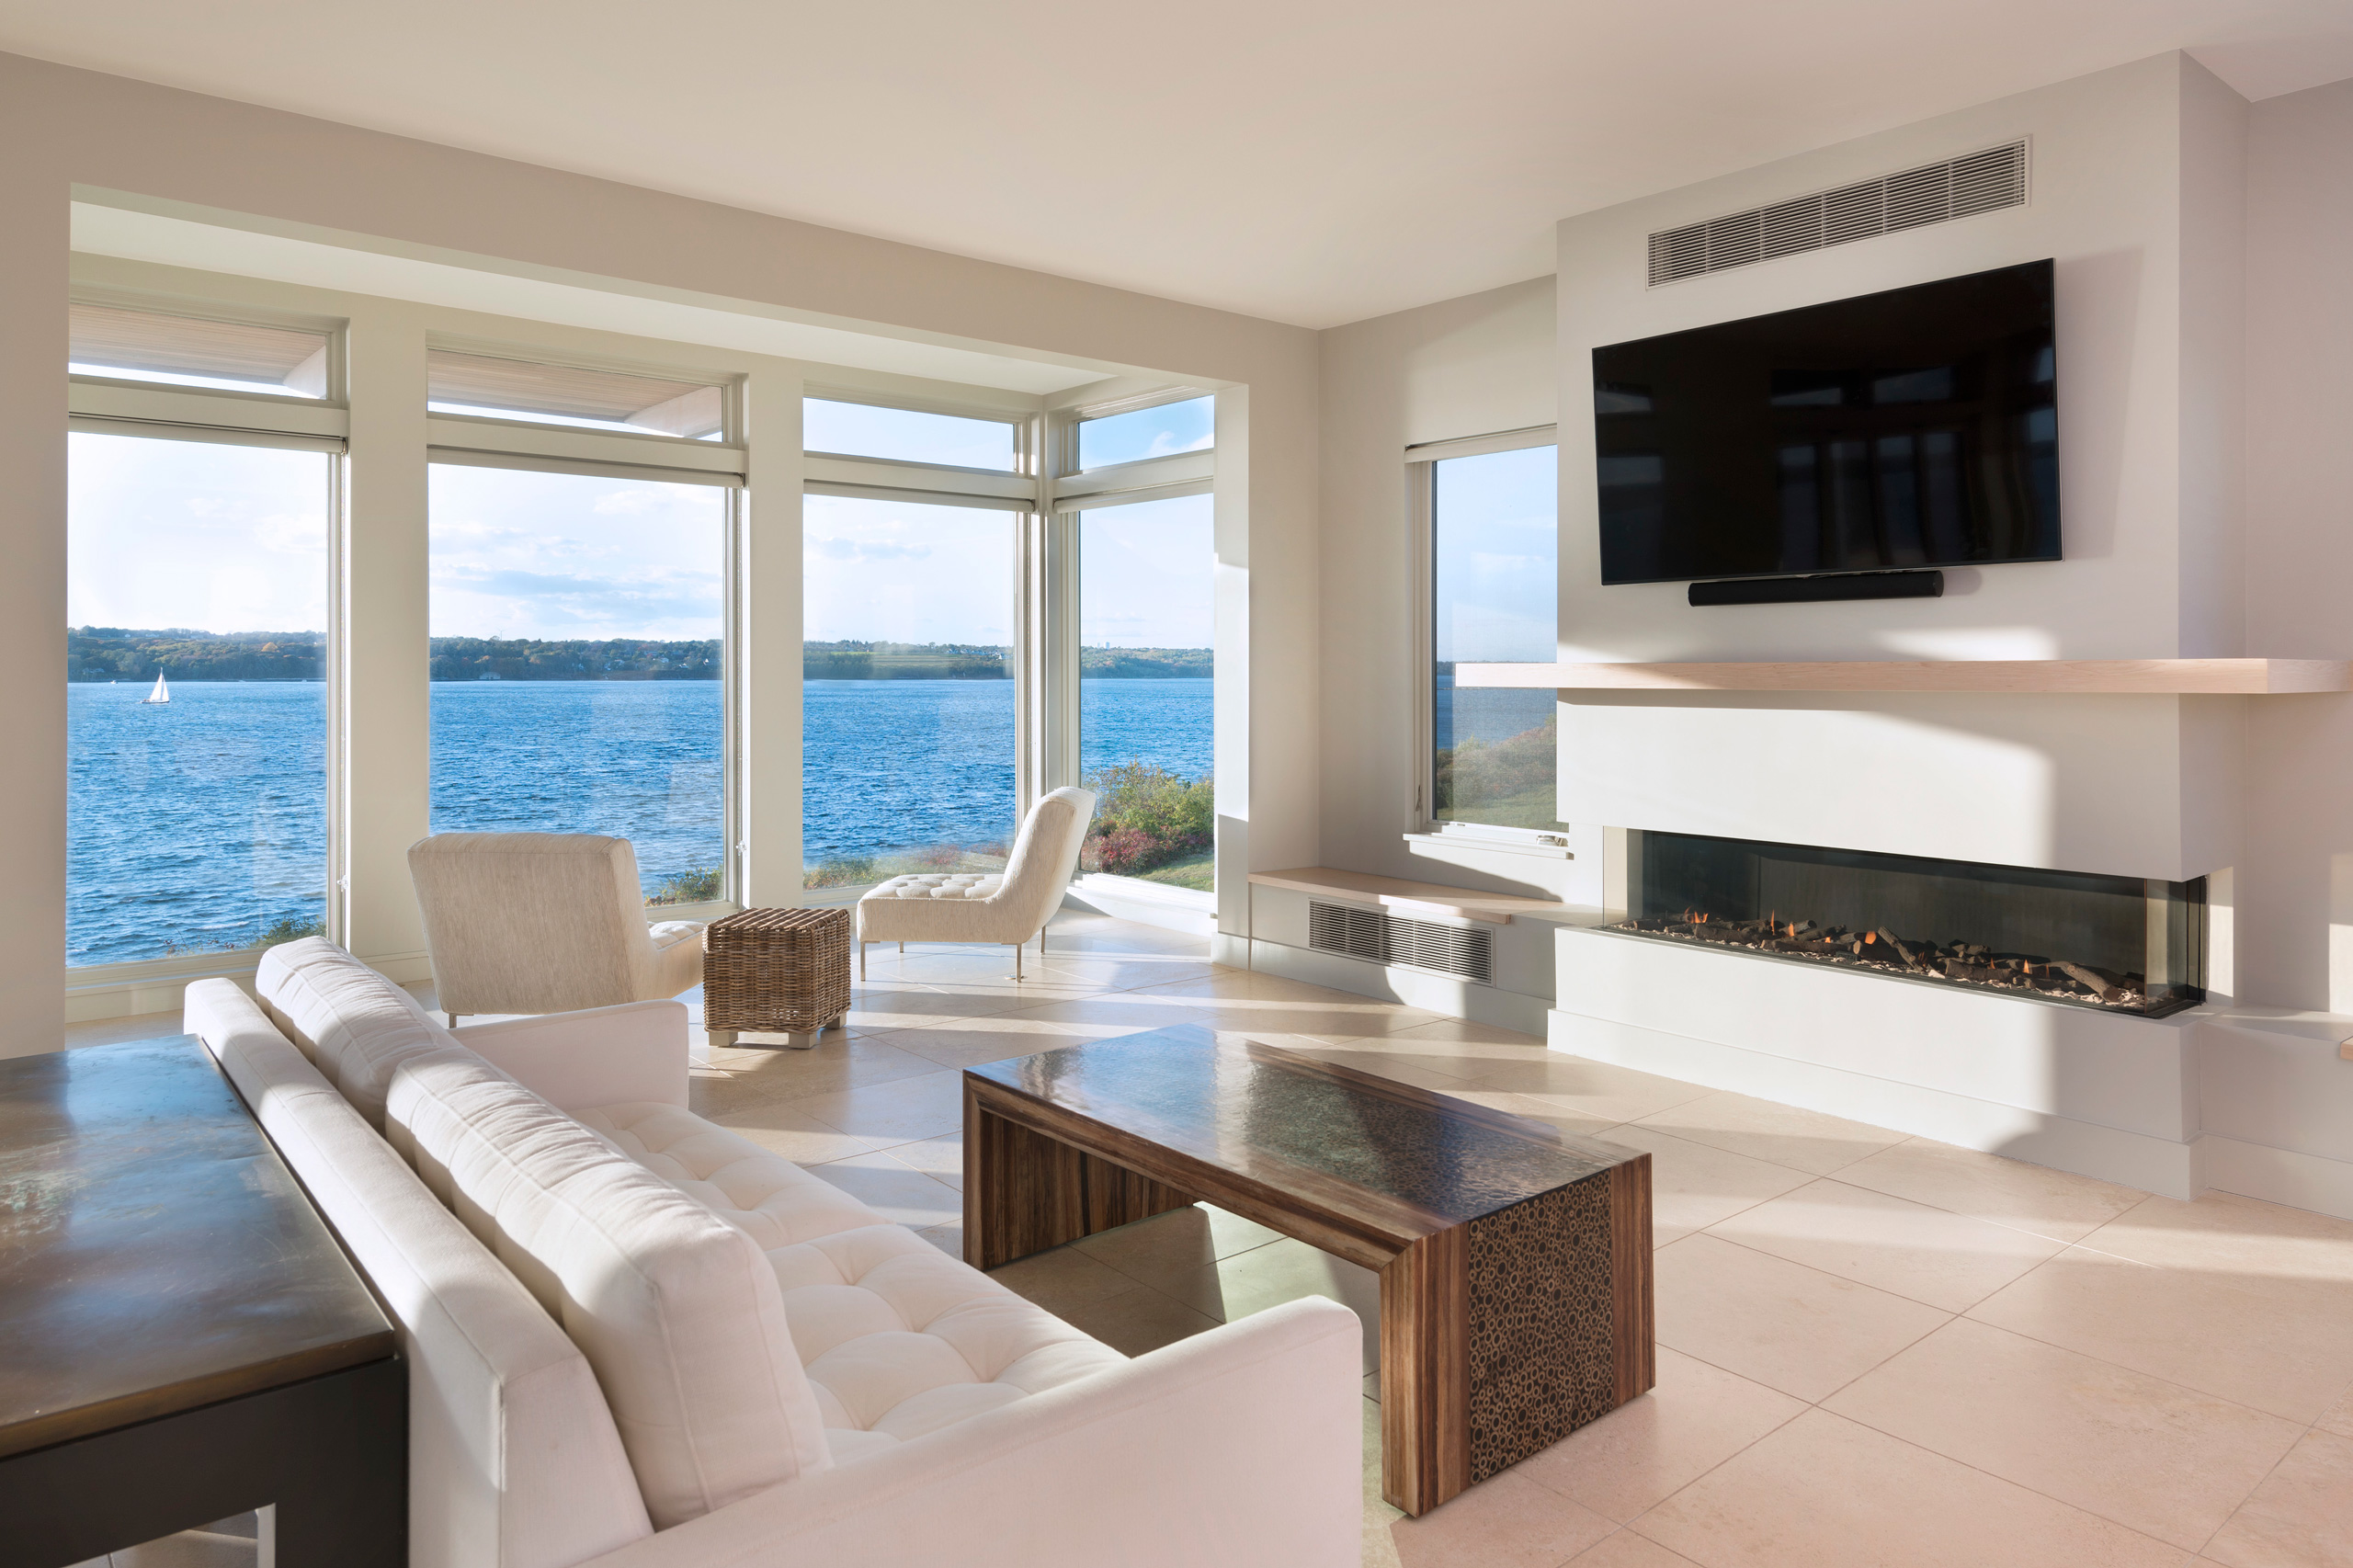 Living and sitting room with expansive view of water